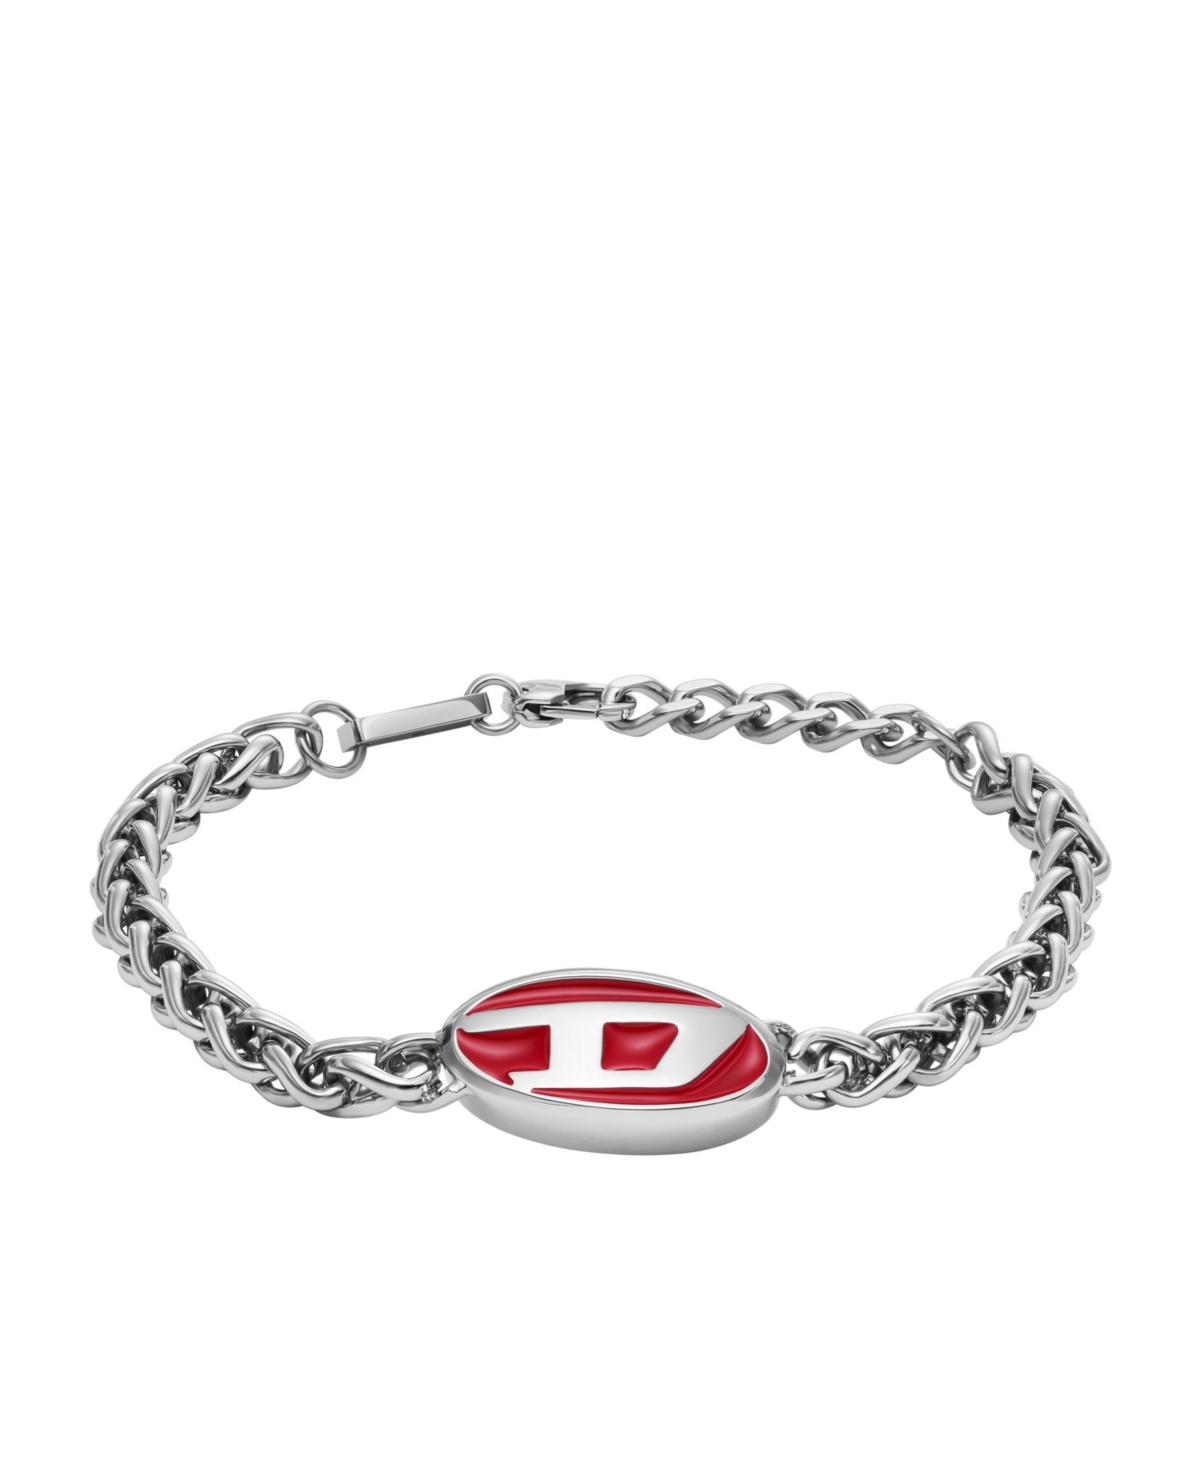 Men's Red Lacquer and Stainless Steel Chain Bracelet - Silver